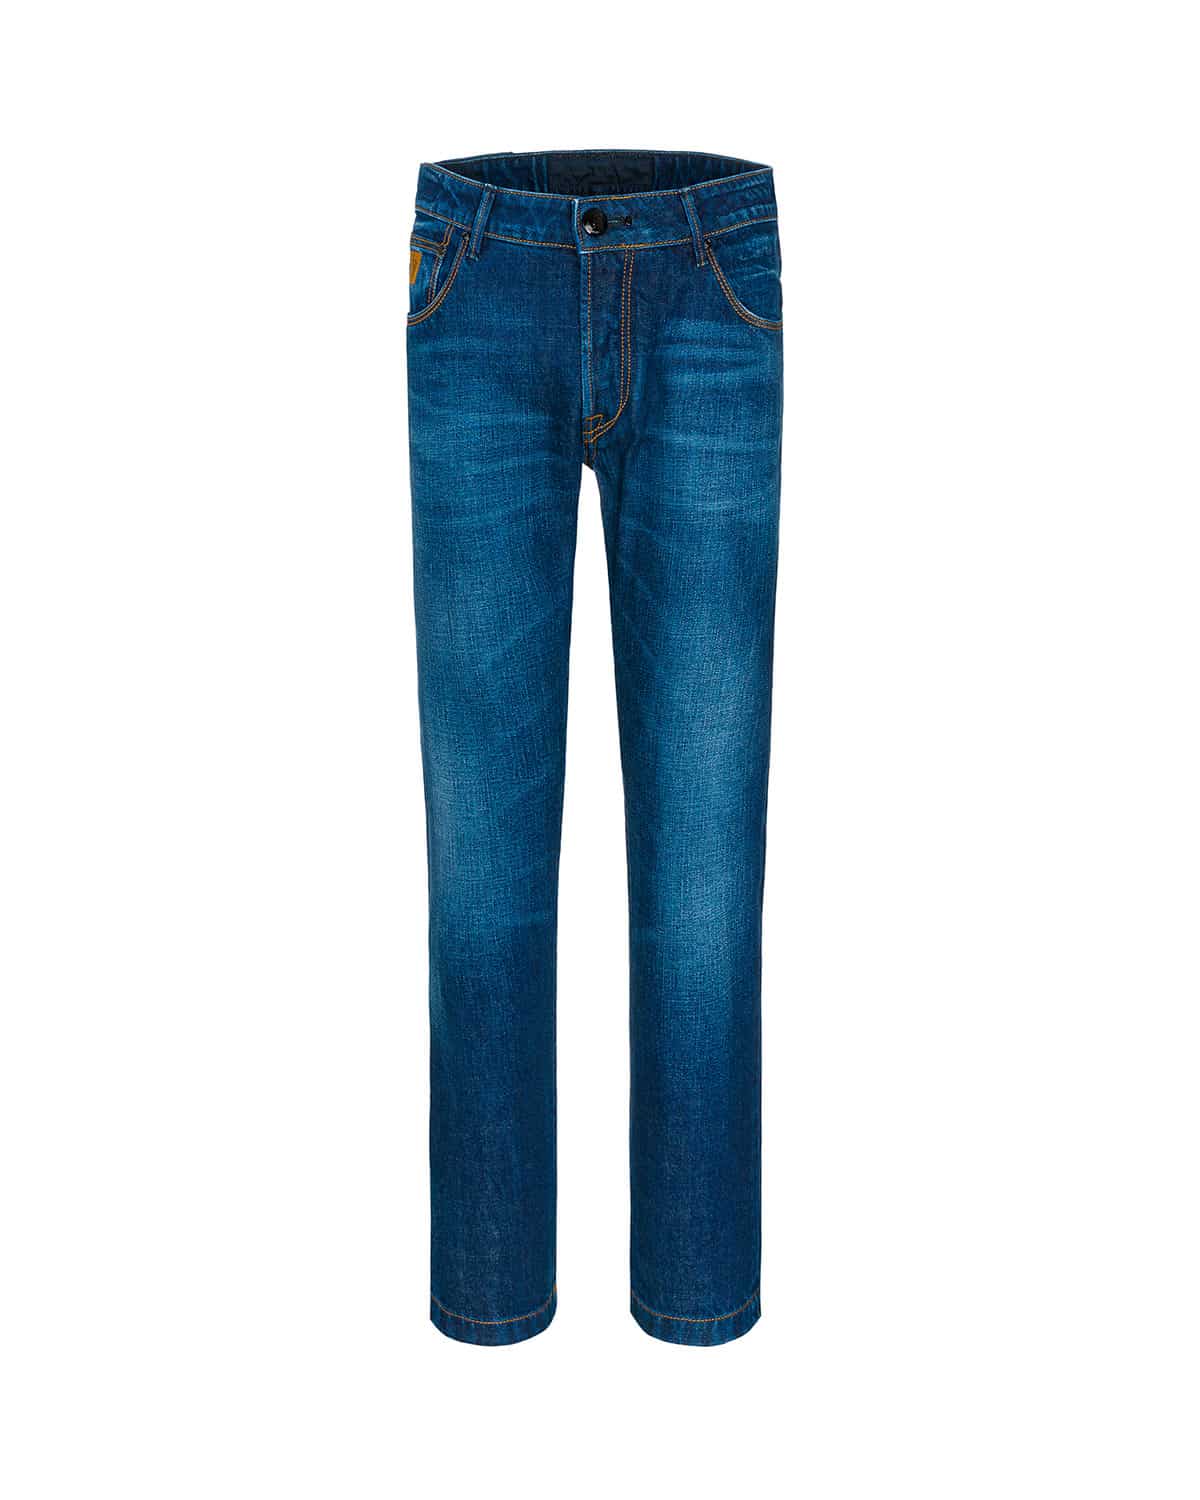 Jeans blue washed blue Orvieto Handpicked.